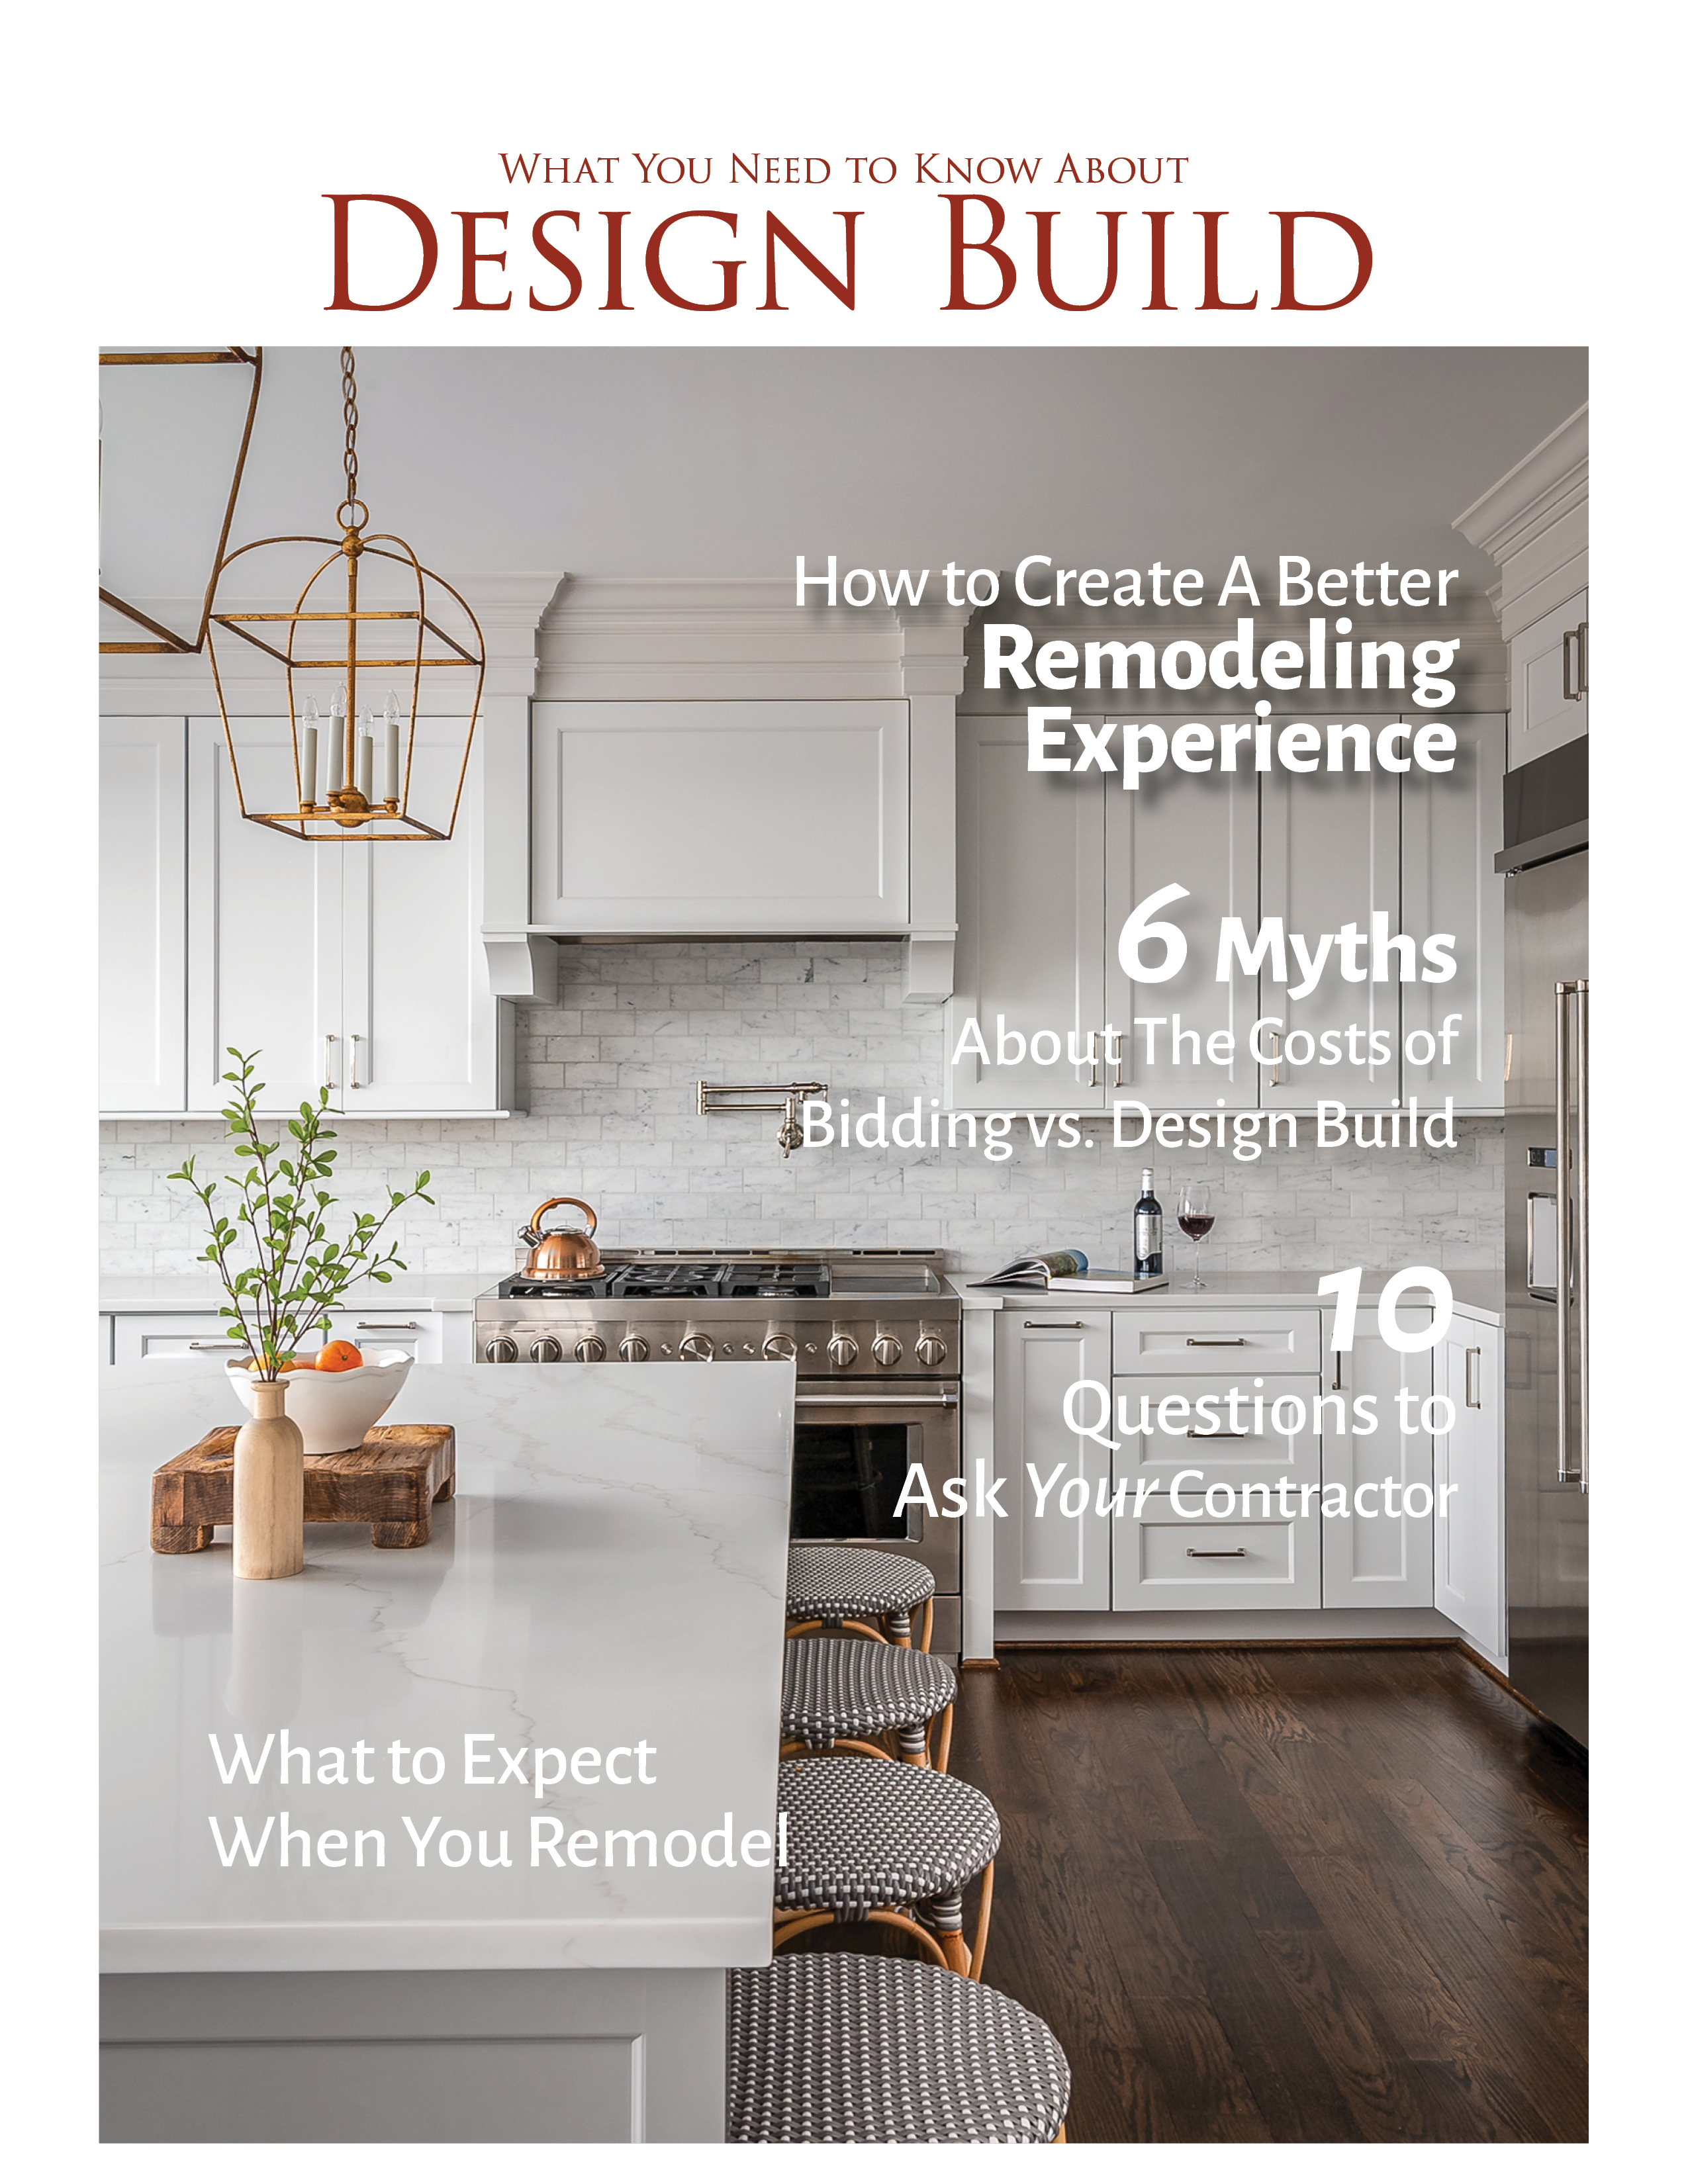 What You Need to Know About Design Build for Remodeling